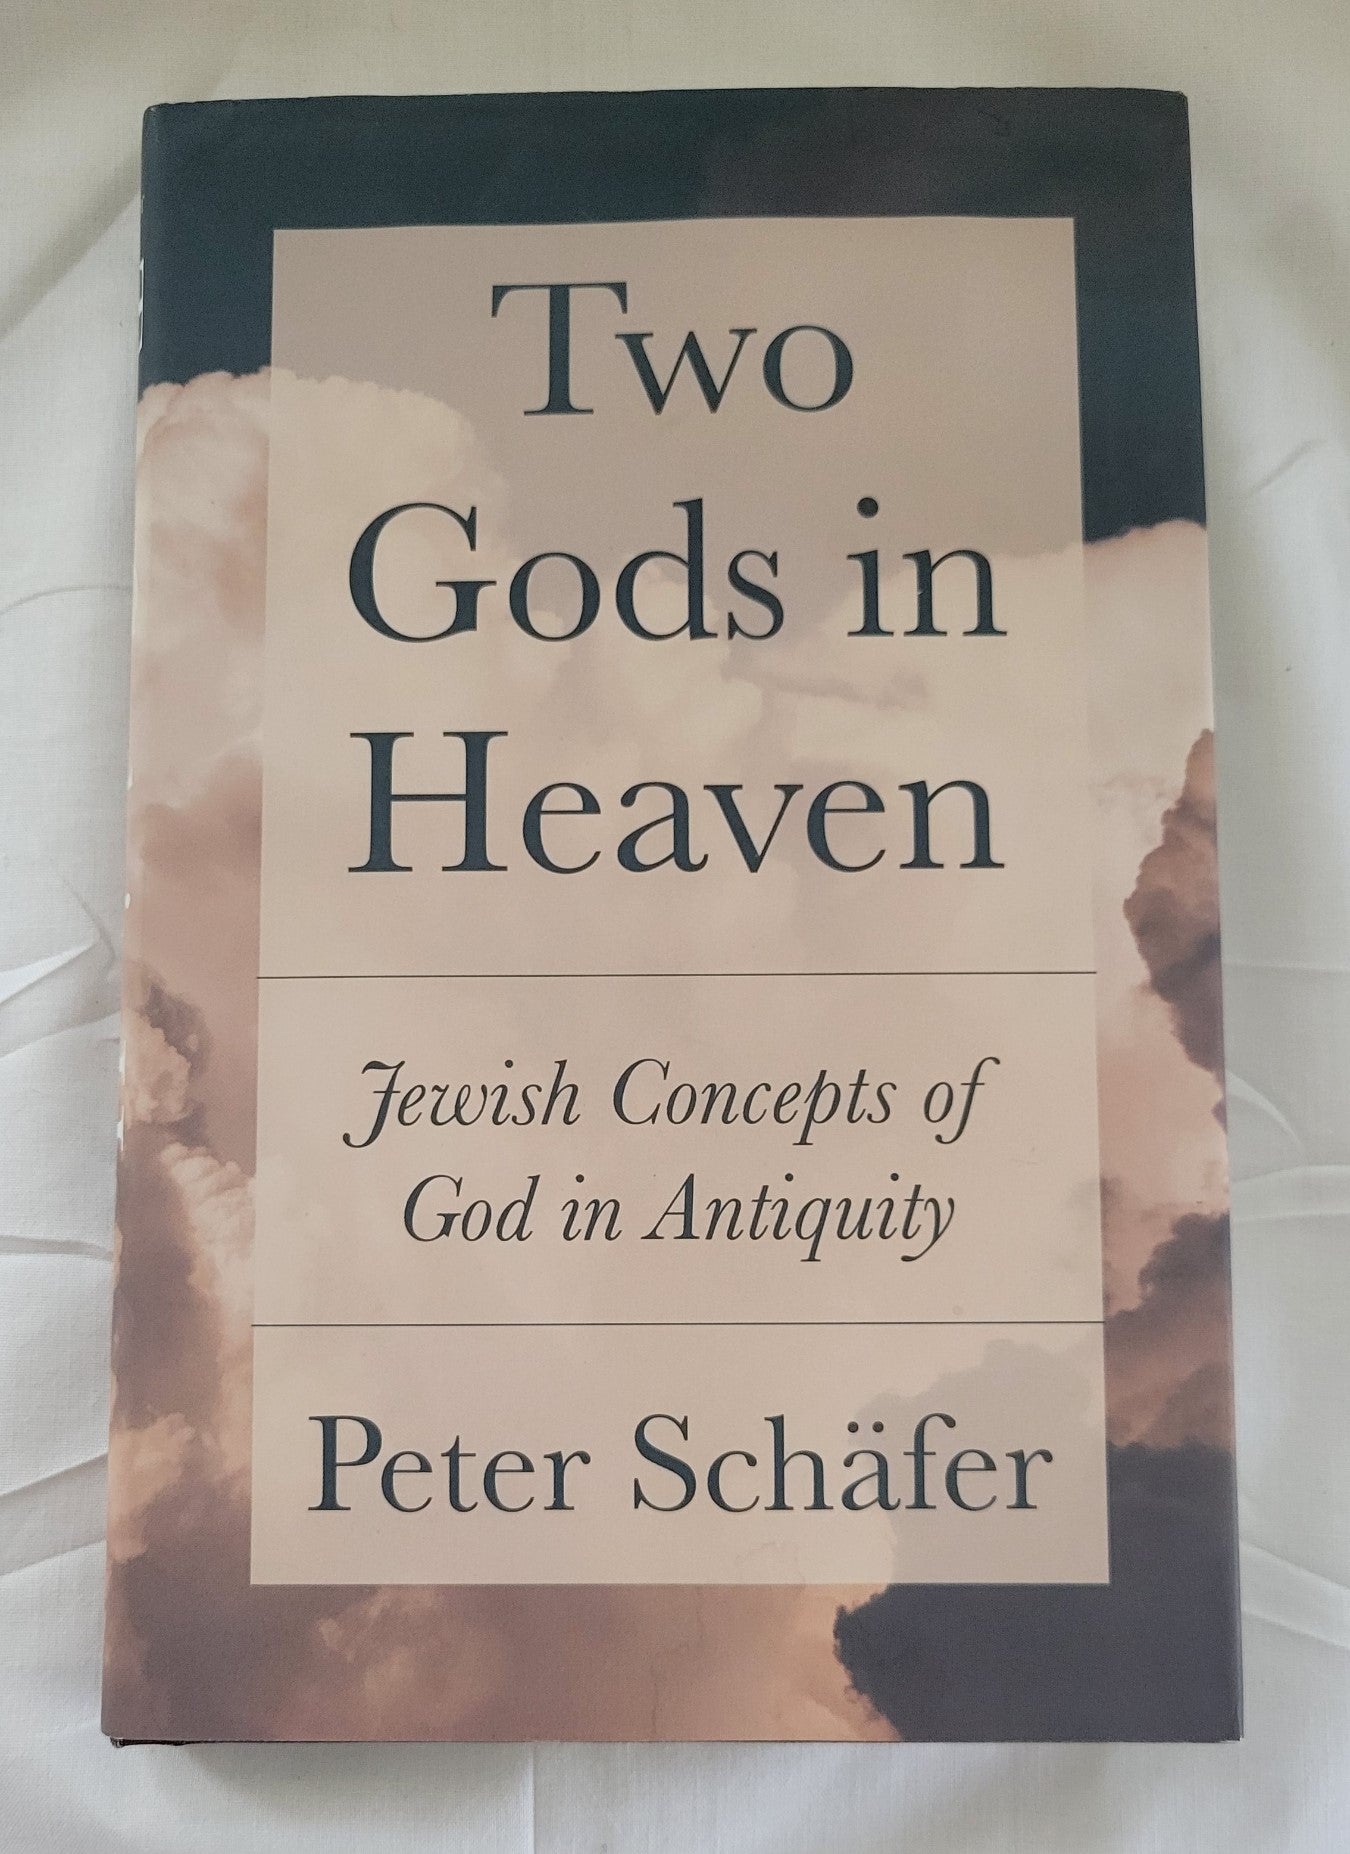 Used book for sale “Two Gods in Heaven: Jewish Concepts of God in Antiquity” written by Peter Schäfer. Front cover.